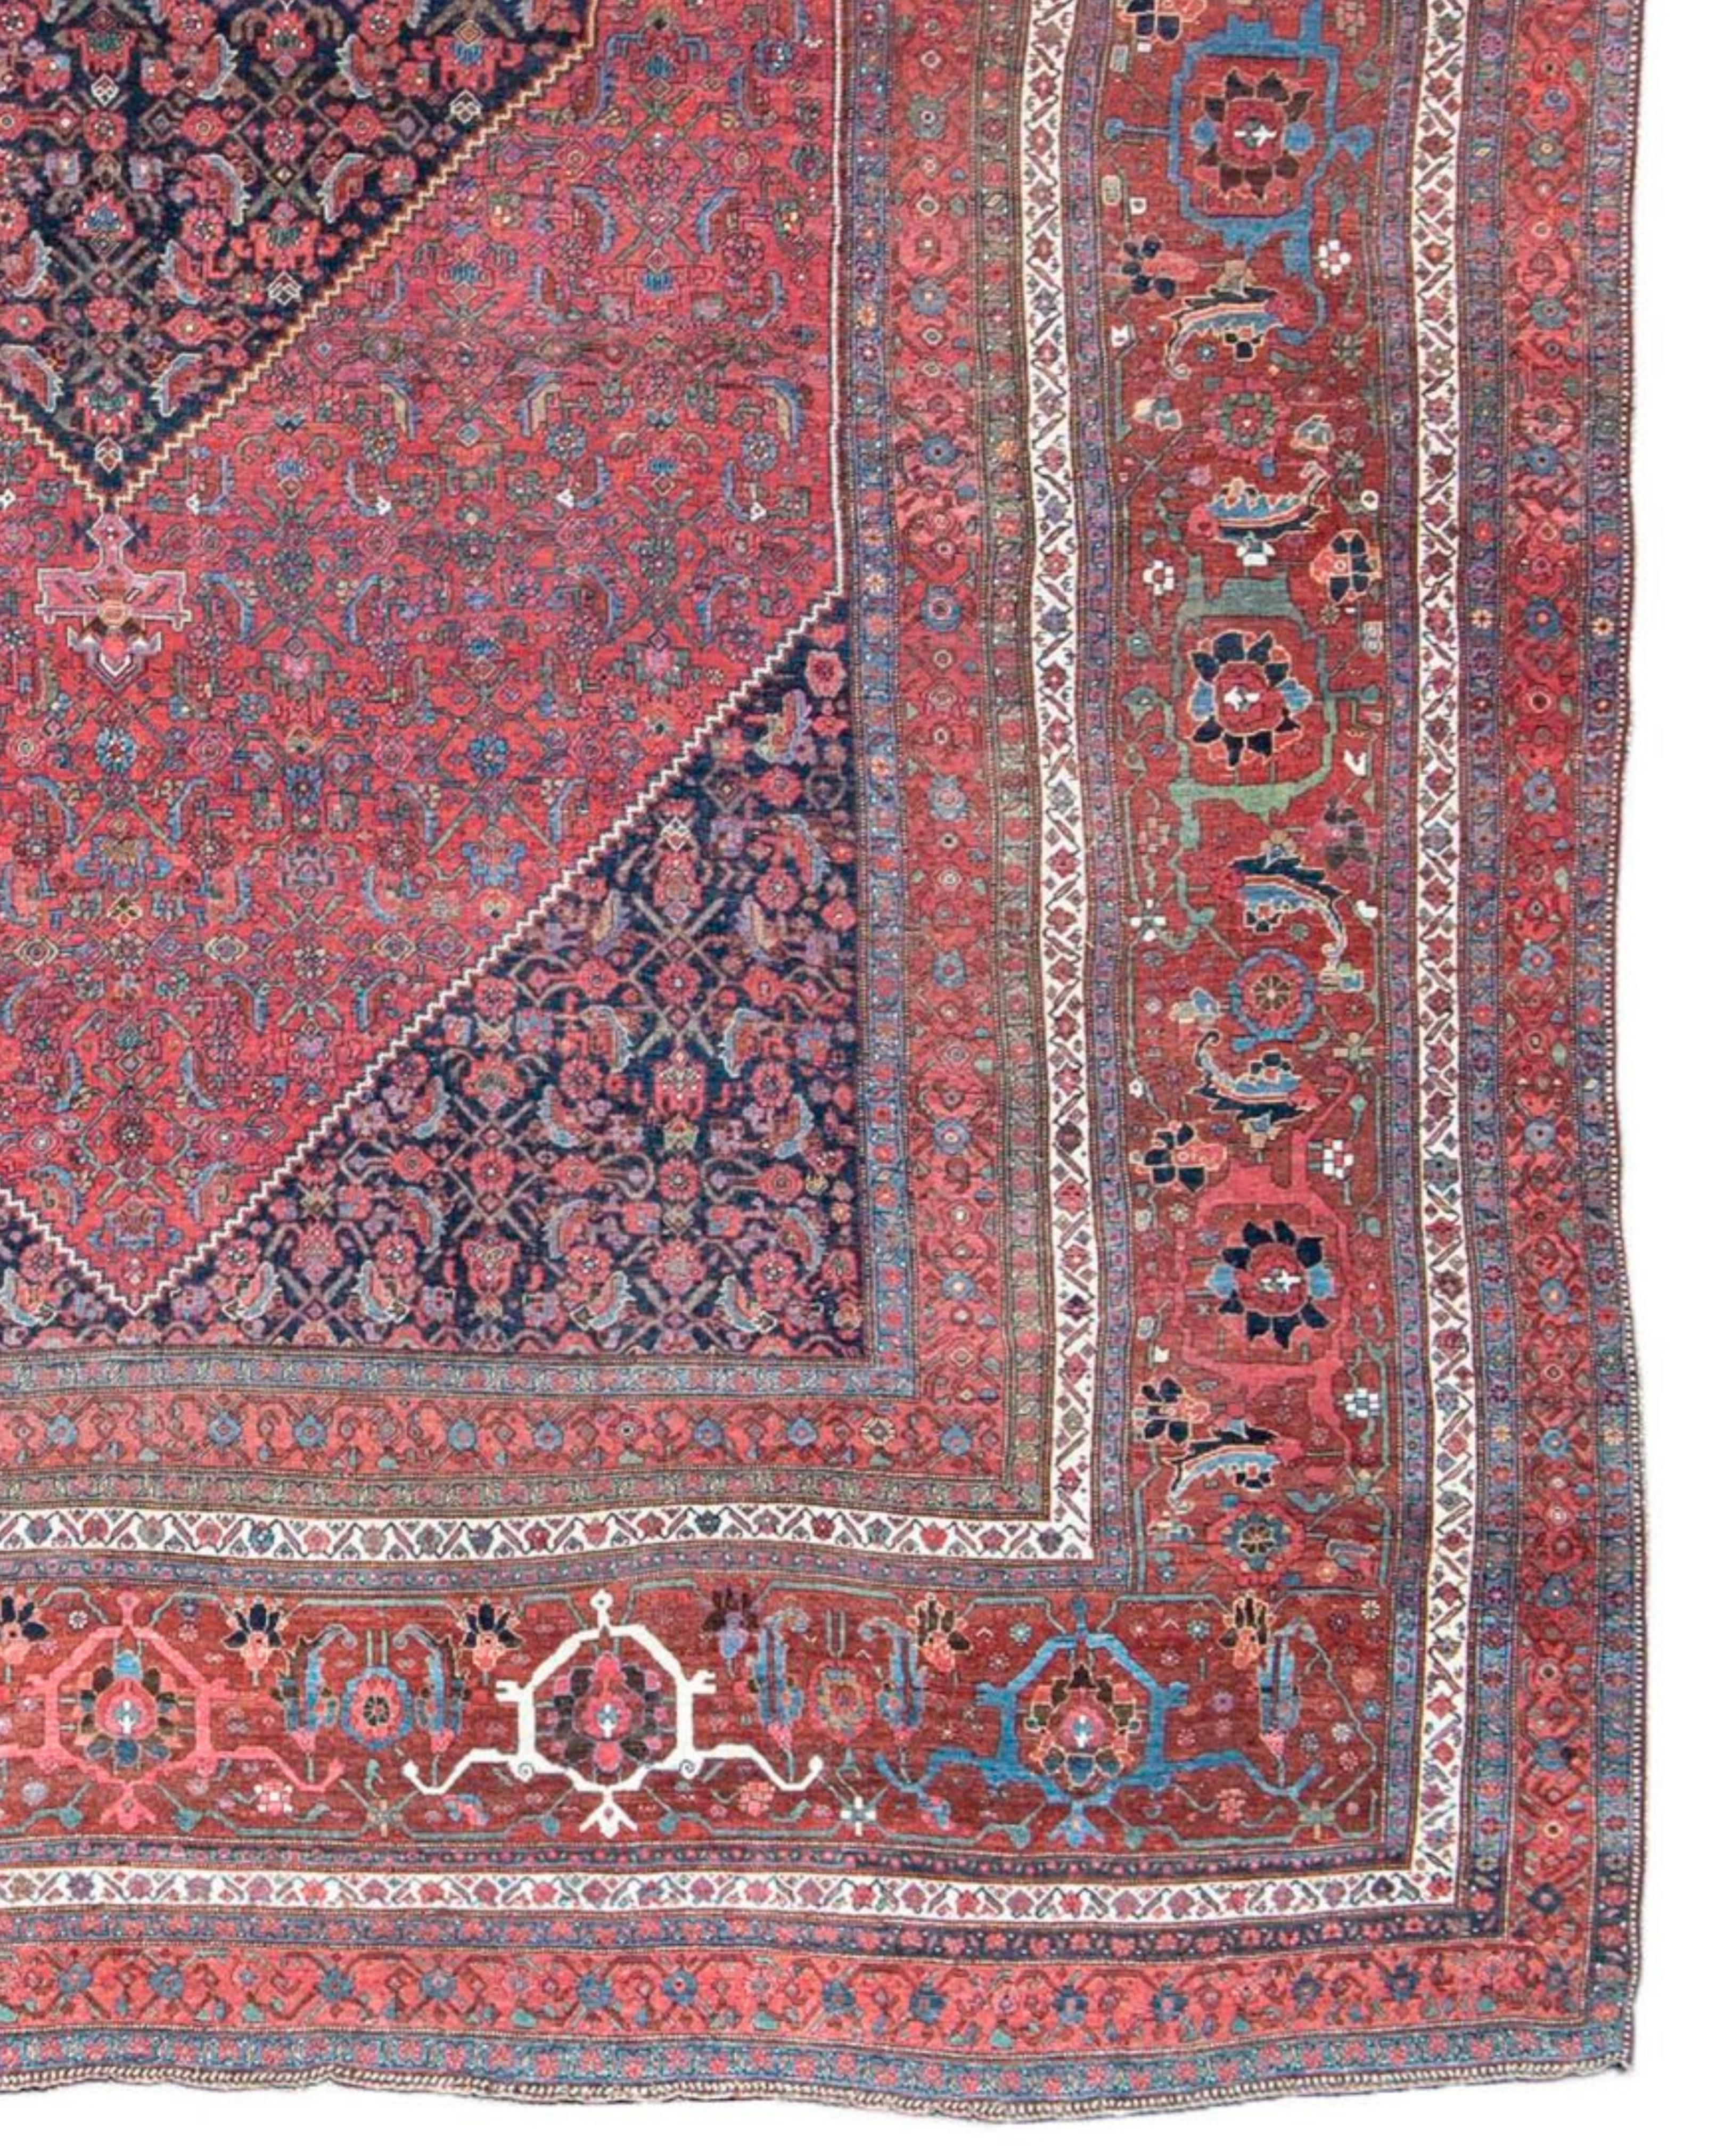 Large Oversized Antique Persian Bidjar Carpet, Late 19th Century

Even wear, which is not unusual for a 19th-century wool foundation rug.

Additional Information:
Dimensions: 15'0